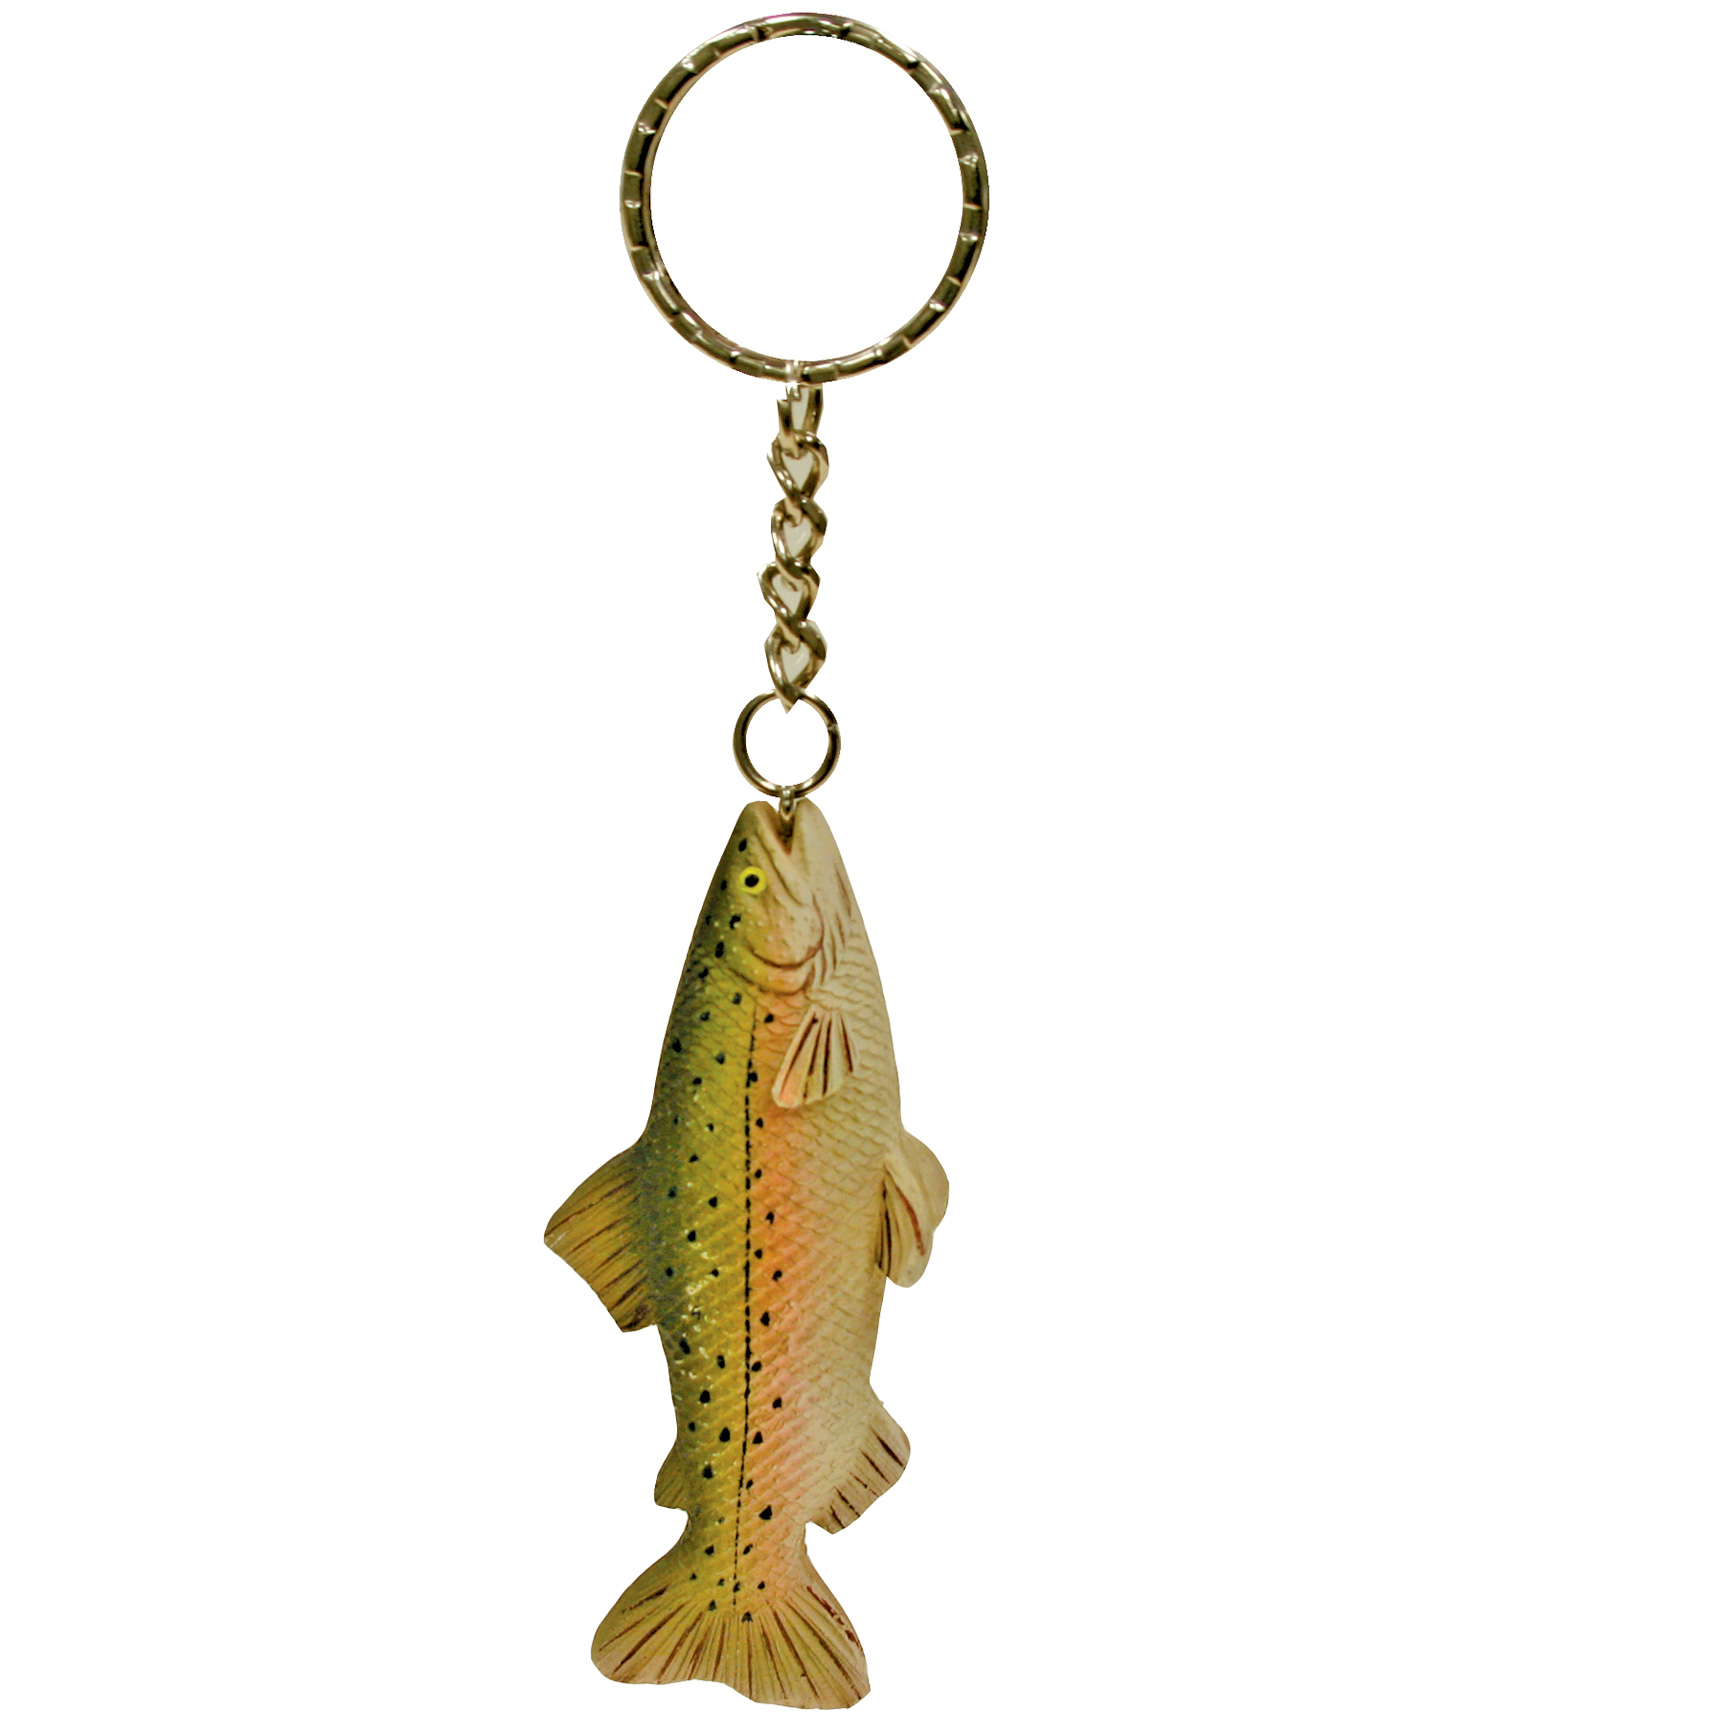 Rainbow Trout Small Keychain, Key Fob, Ring, Pewter Chain, Fish, Fishing,  Handmade in The Usa, Over 500 Keychain Designs. F002Kc - Yahoo Shopping